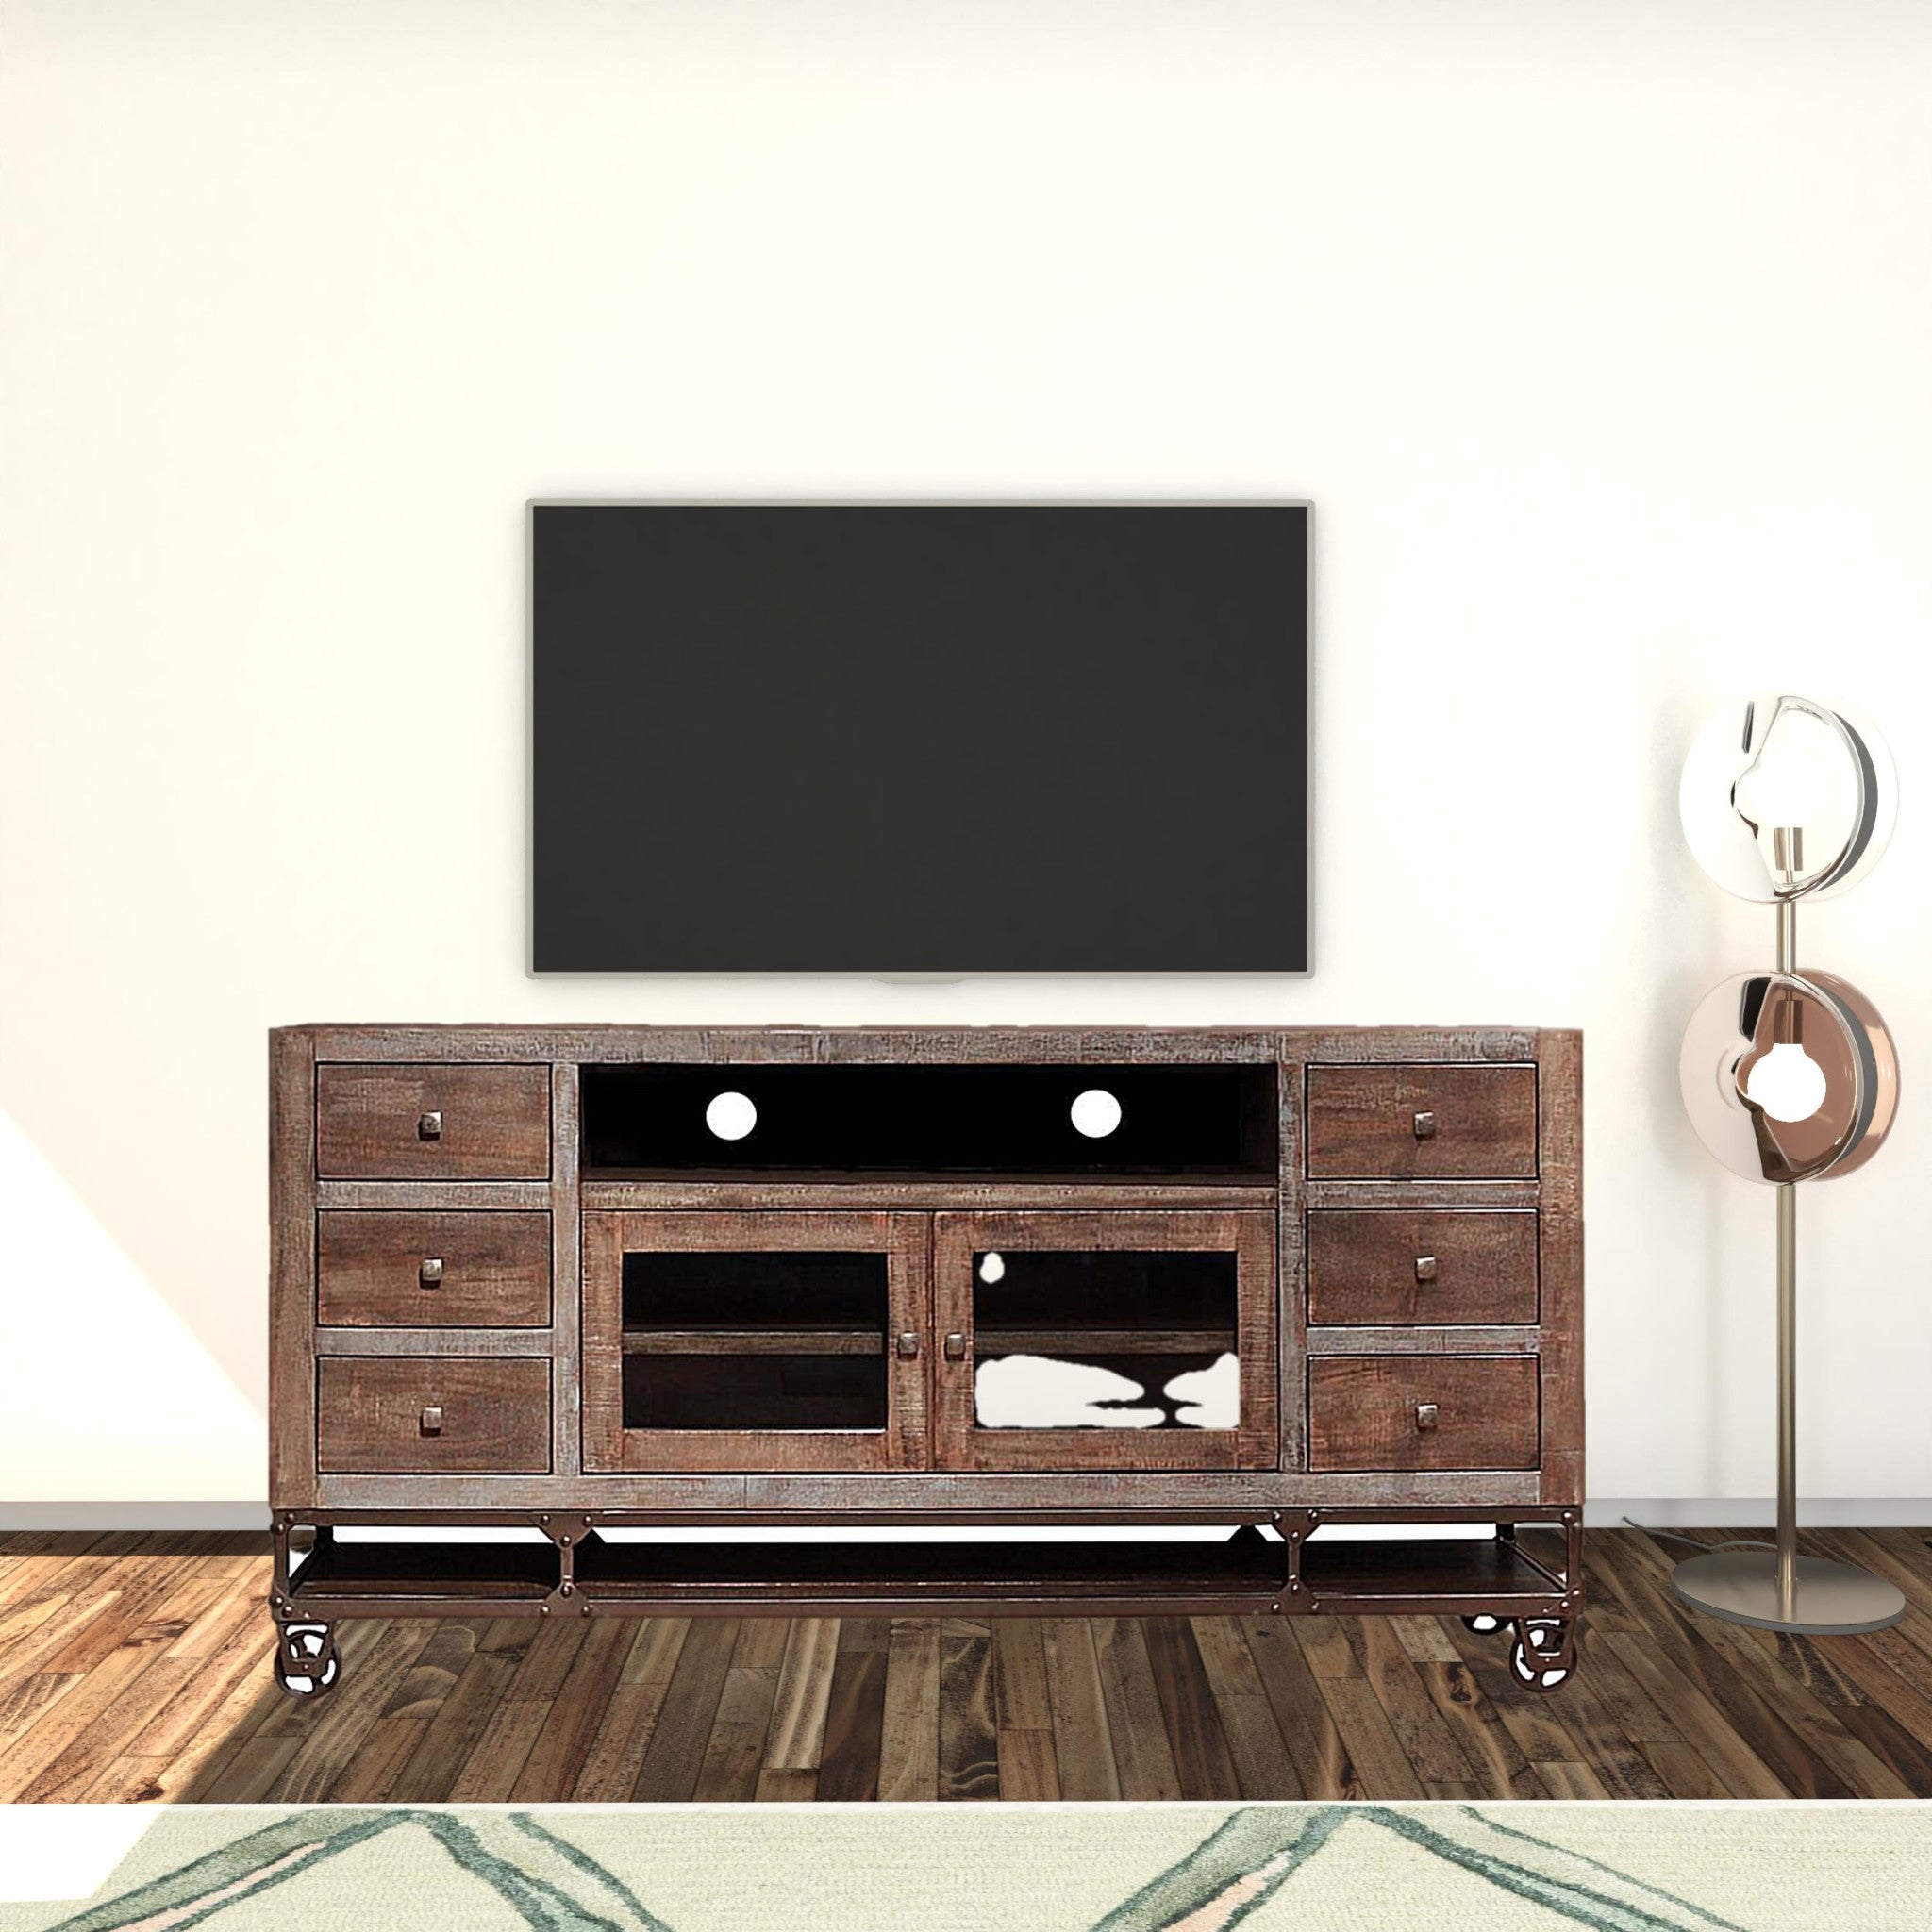 76" Brown Solid Wood Cabinet Enclosed Storage Distressed TV Stand